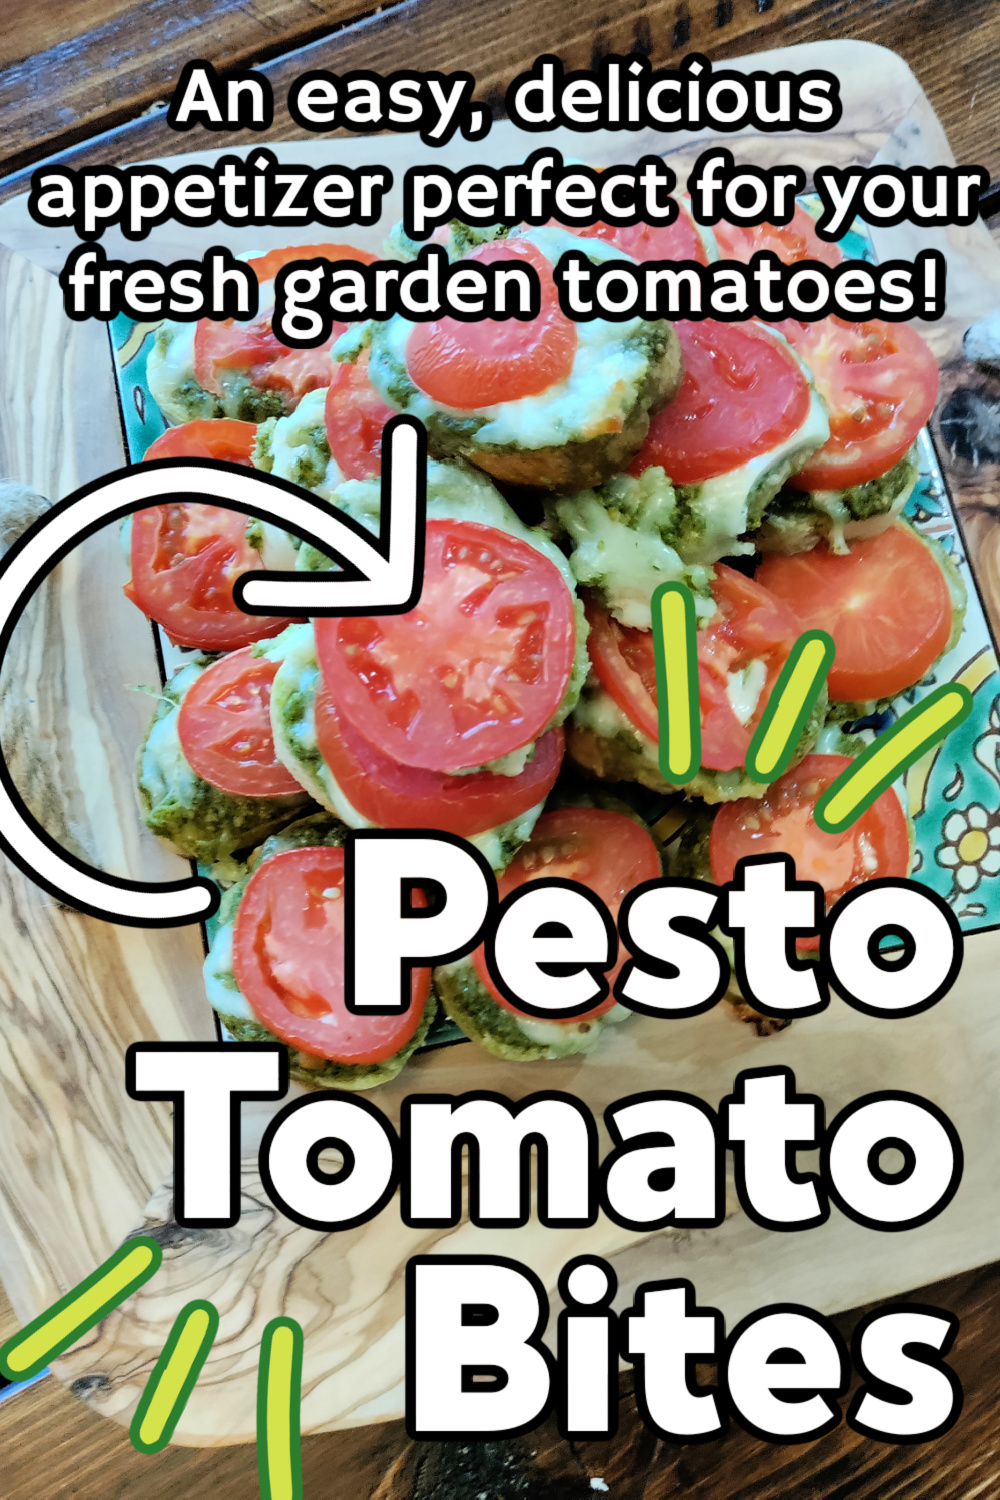 Pesto Tomato Bites with an arrow and a text overlay that says, "An easy, delicious appetizer perfect for your fresh garden tomatoes and more text that says, Pesto Tomato Bites".